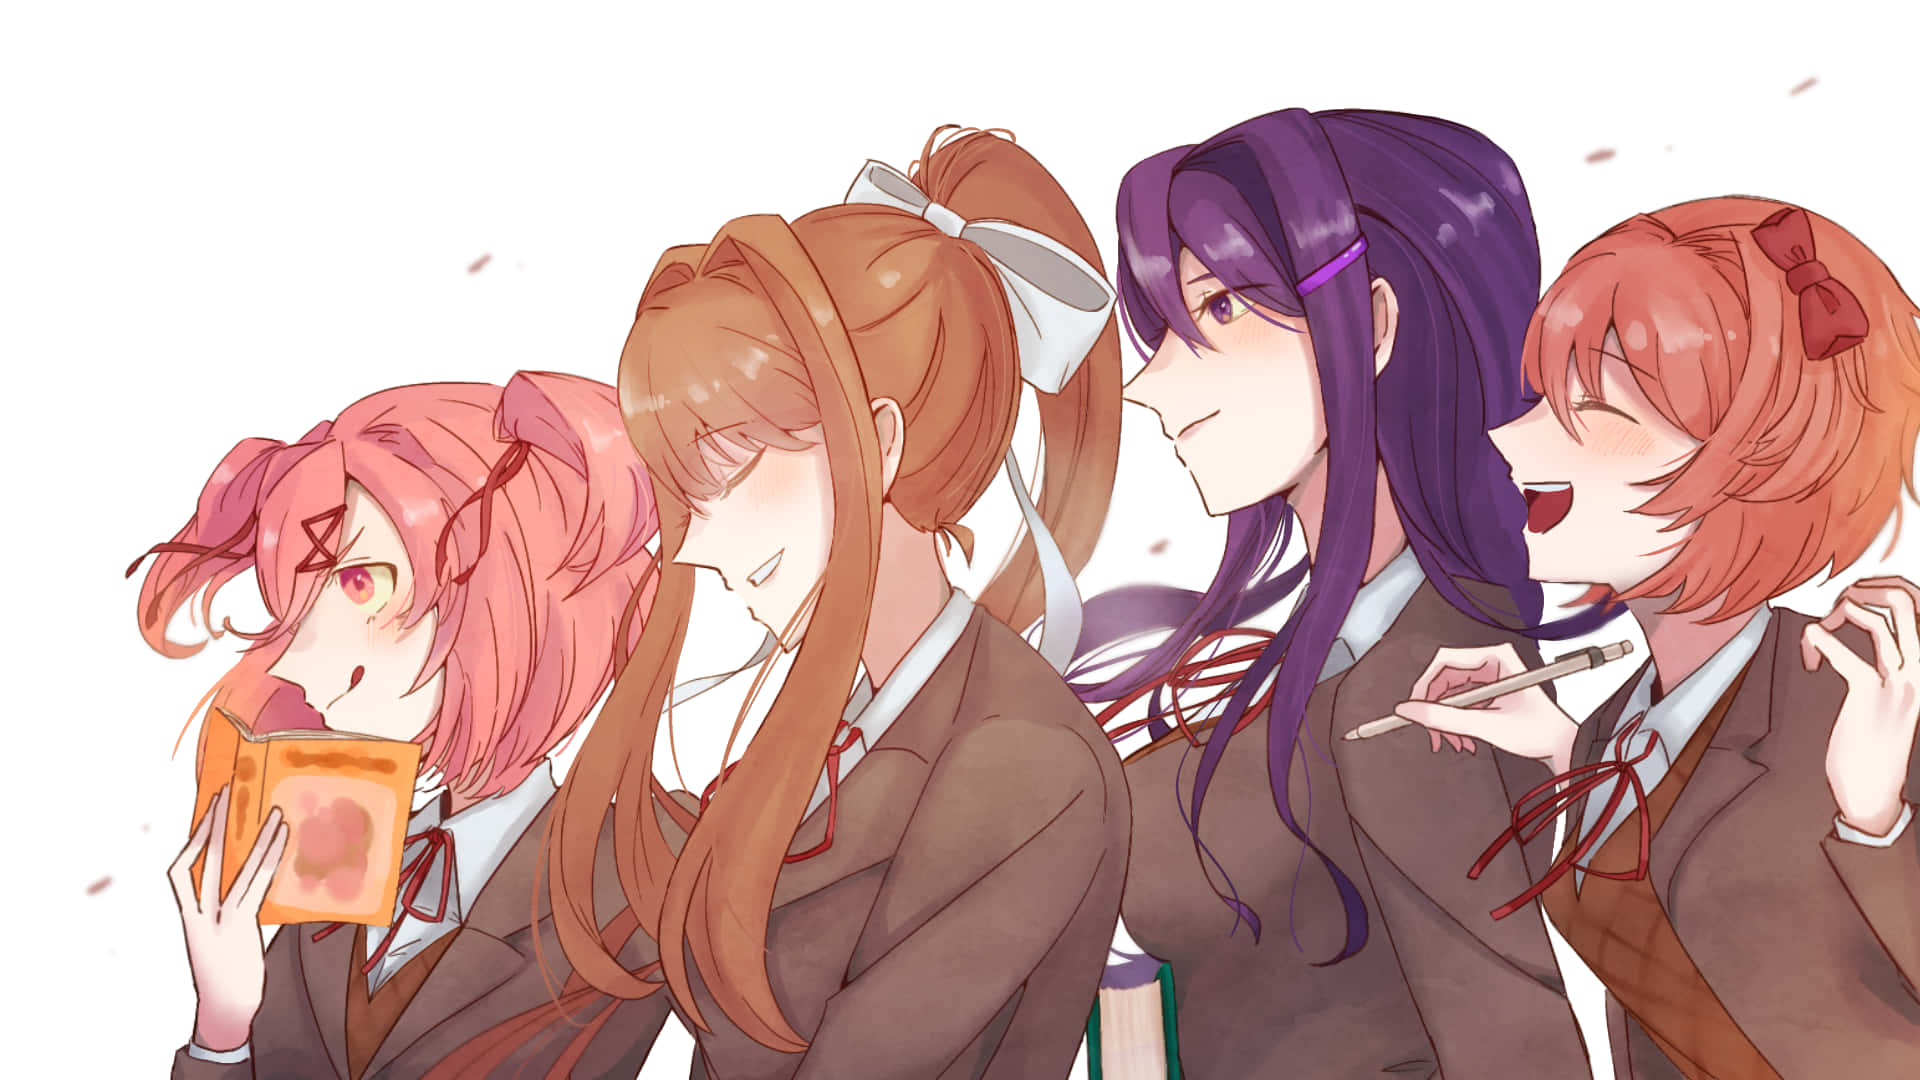 Three schoolgirls share a colorful moment in the world of Ddlc.